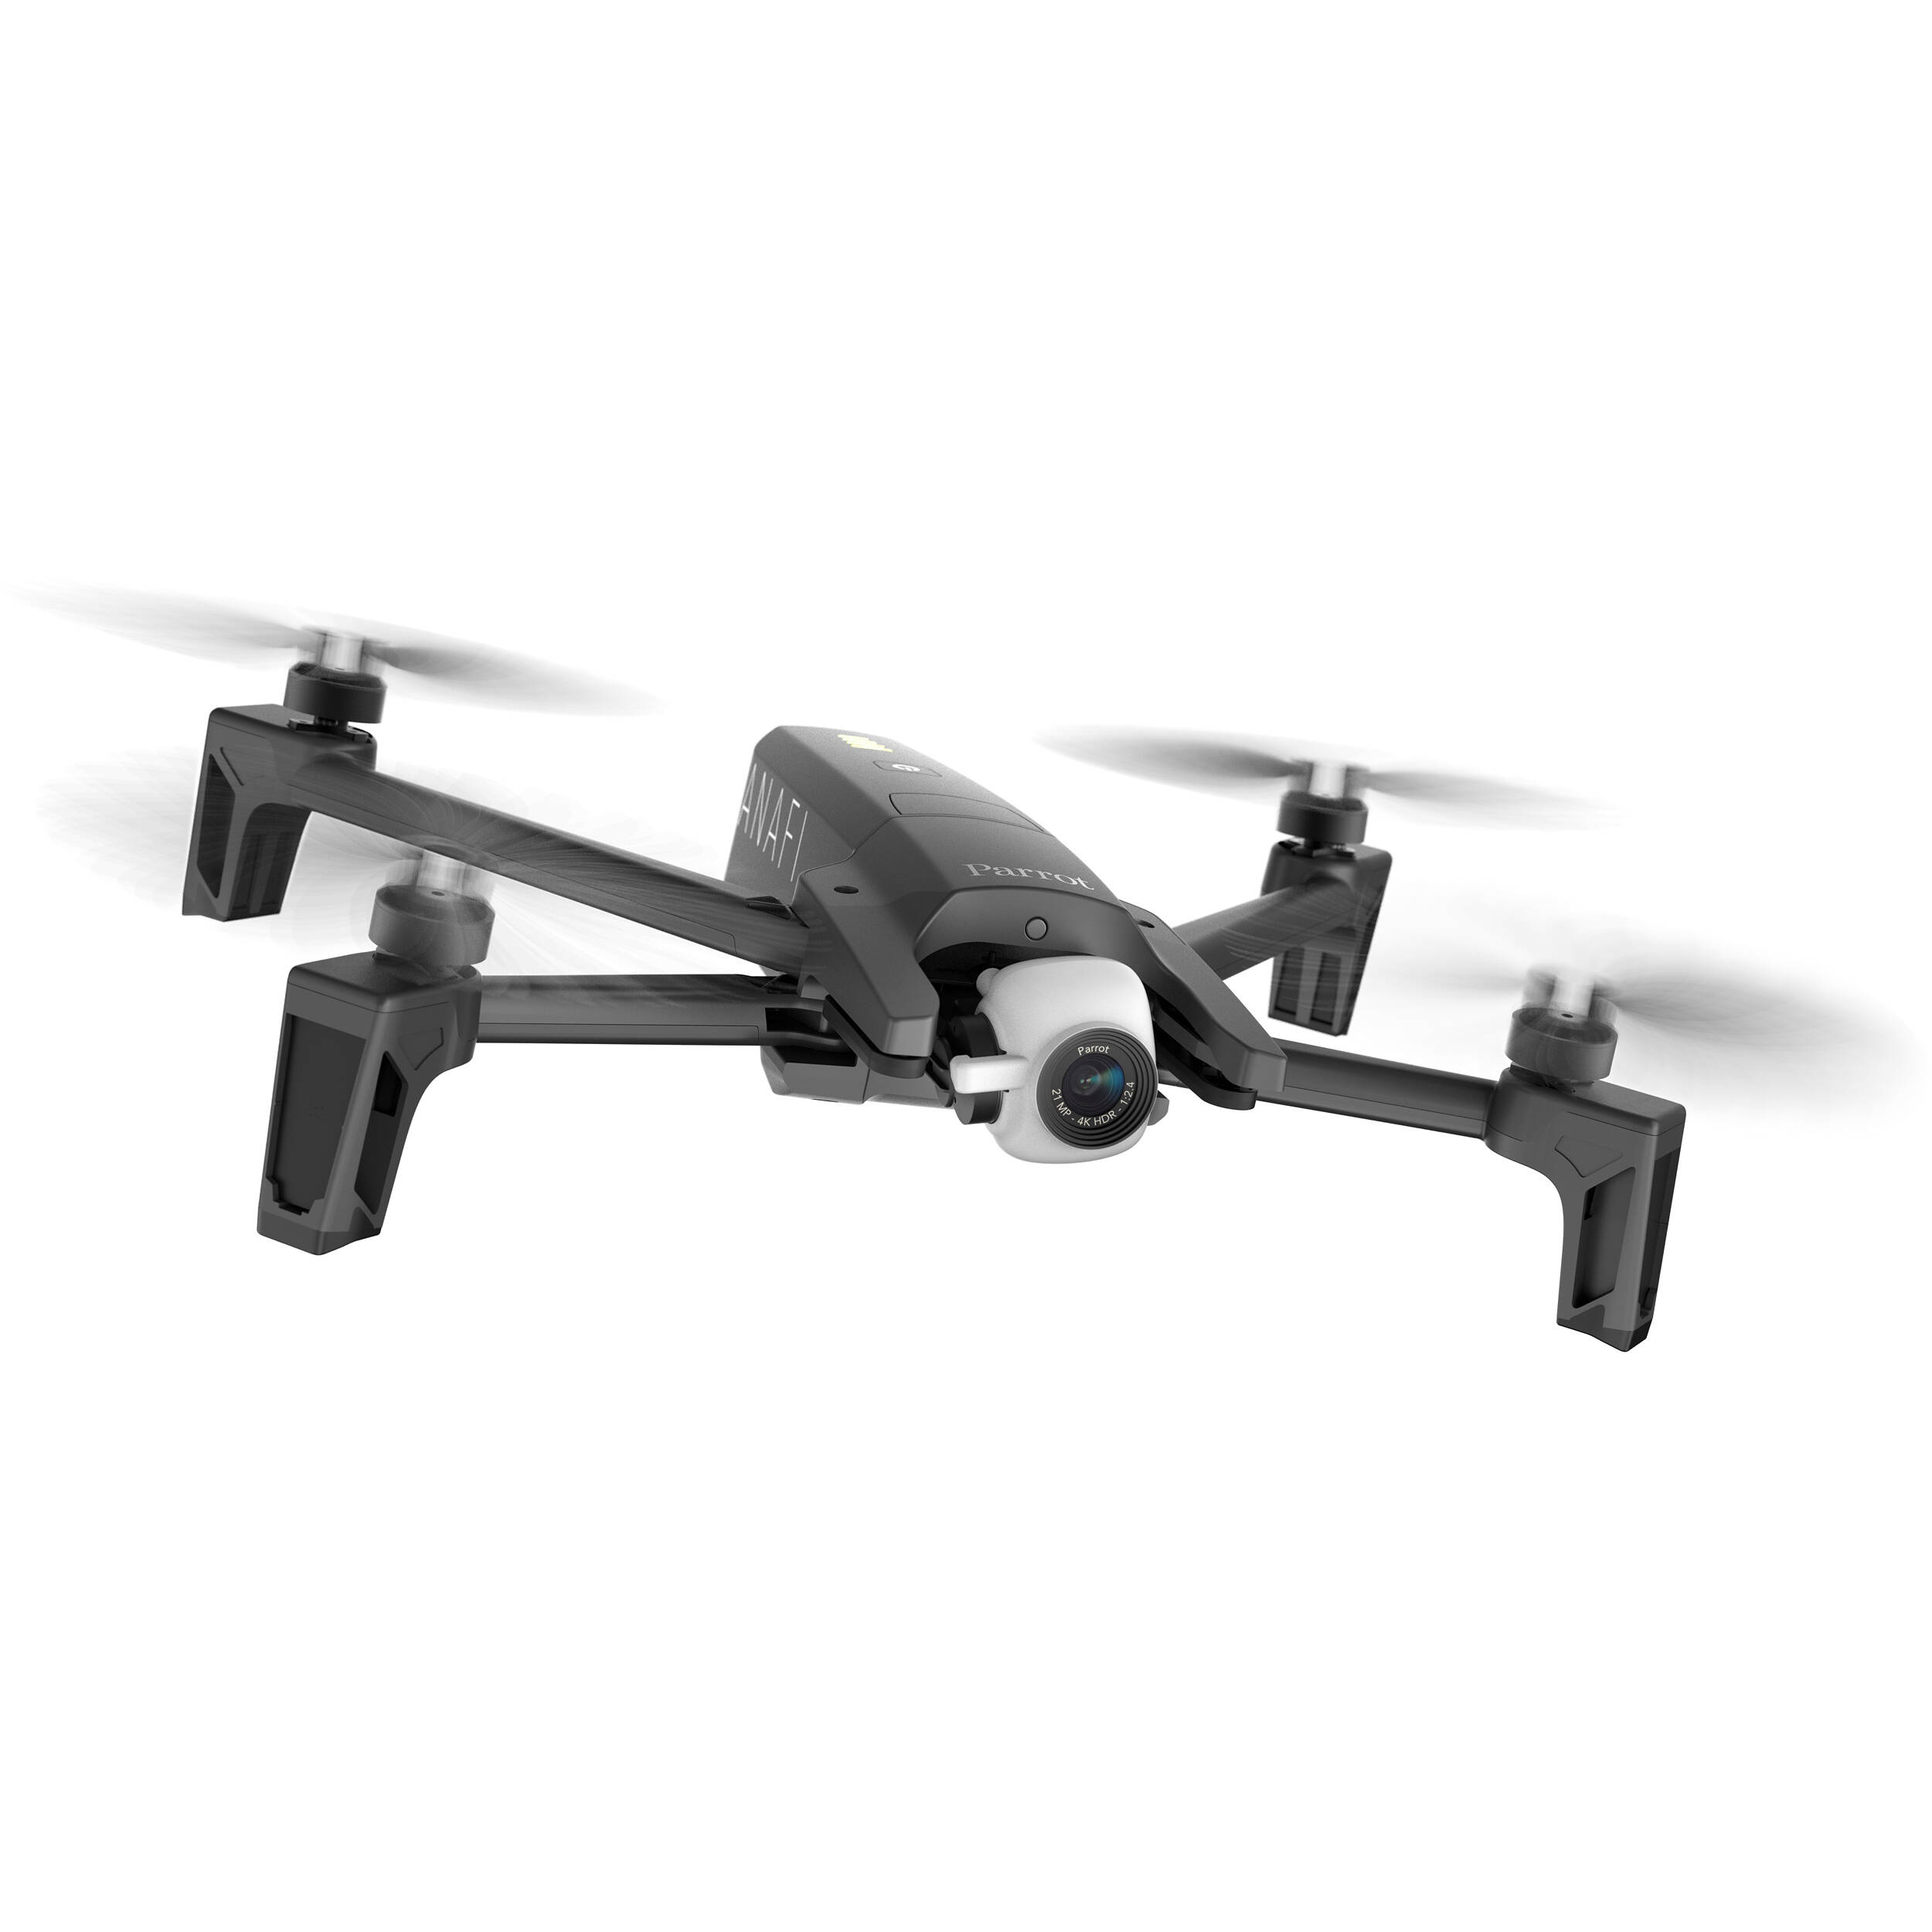 parrot anafi drone